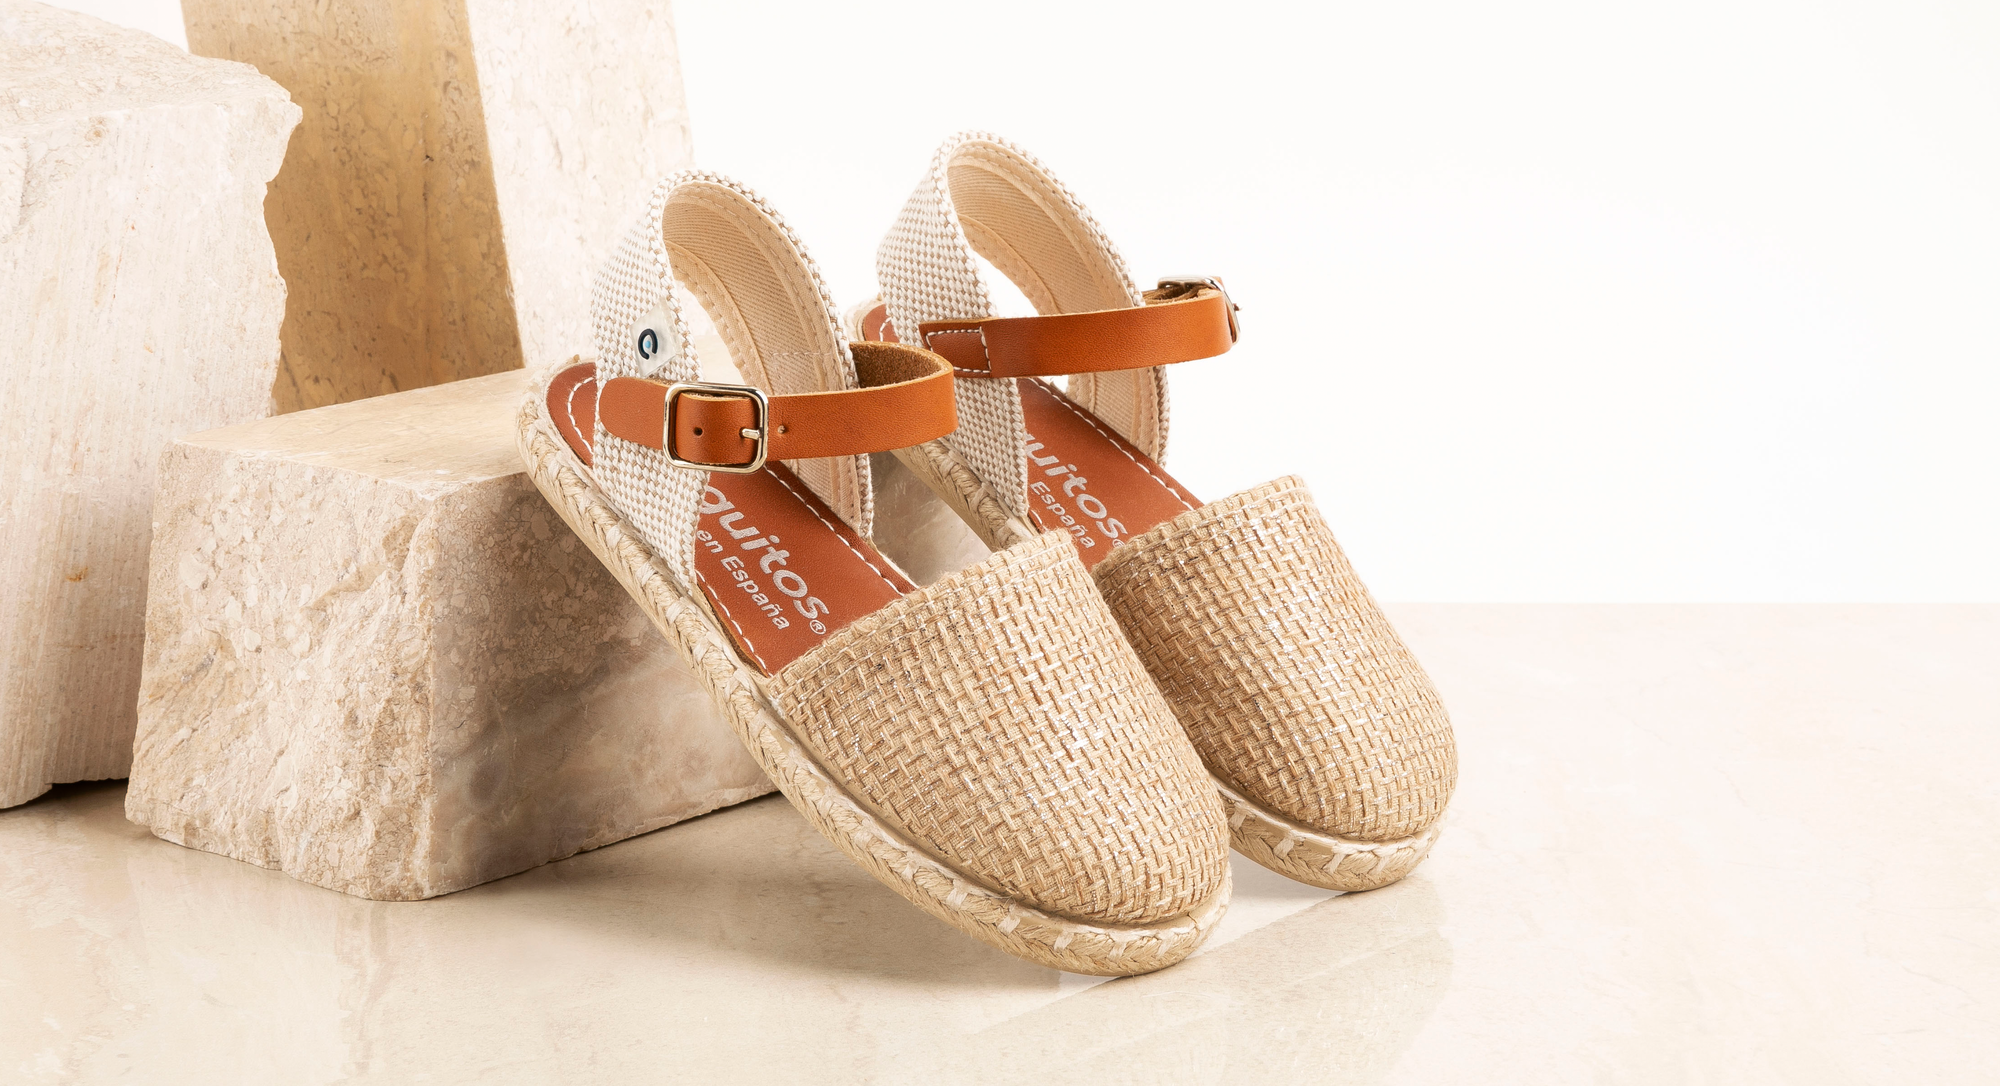 Here are the best tips for cleaning espadrilles